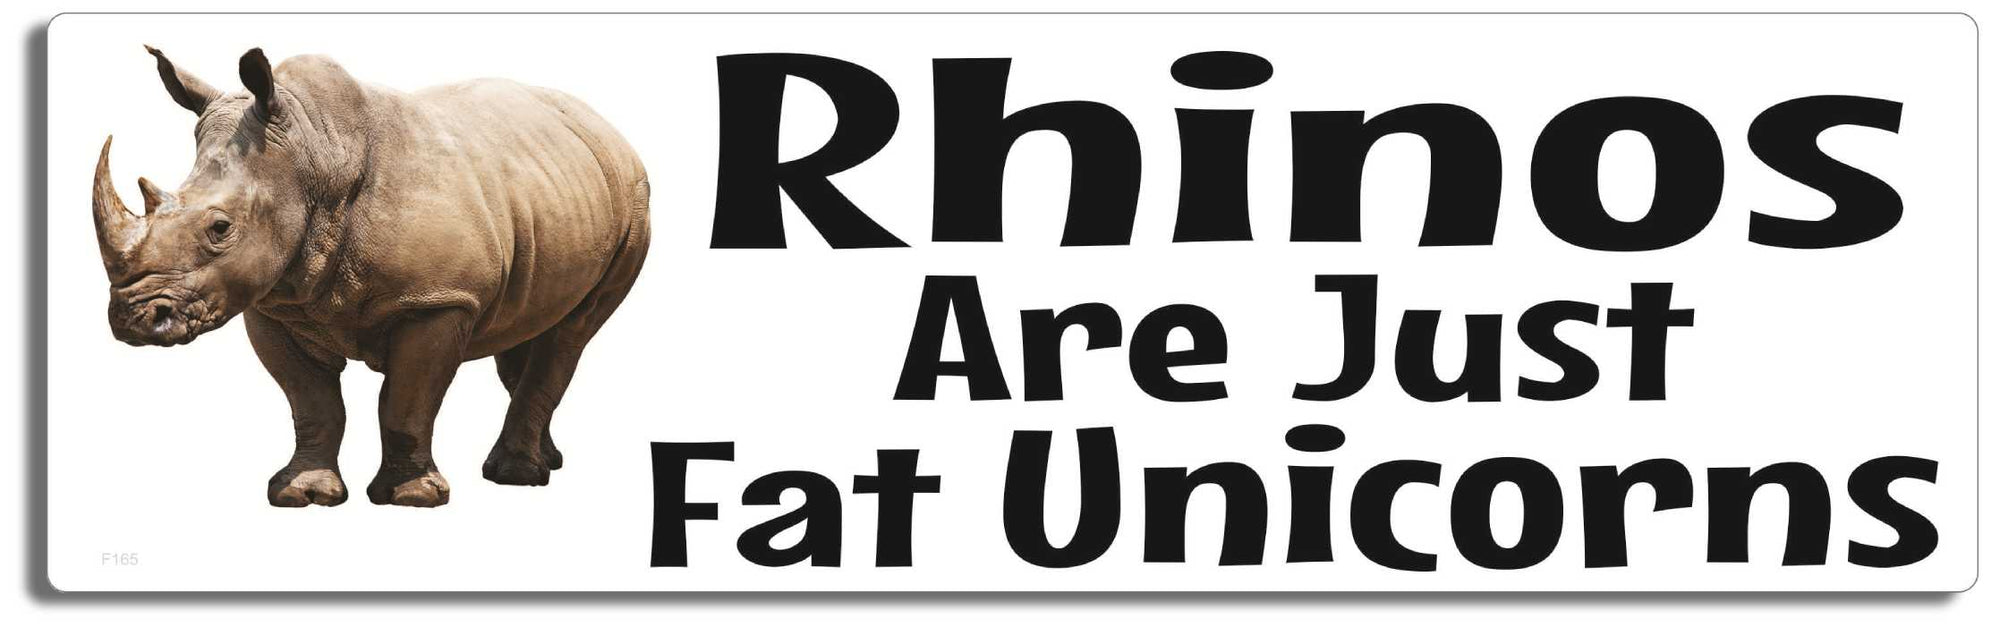 Rhinos are just fat unicorns -  3" x 10" Bumper Sticker--Car Magnet- -  Decal Bumper Sticker-funny Bumper Sticker Car Magnet Rhinos are just fat unicorns-   Decal for cars funny, funny quote, funny saying